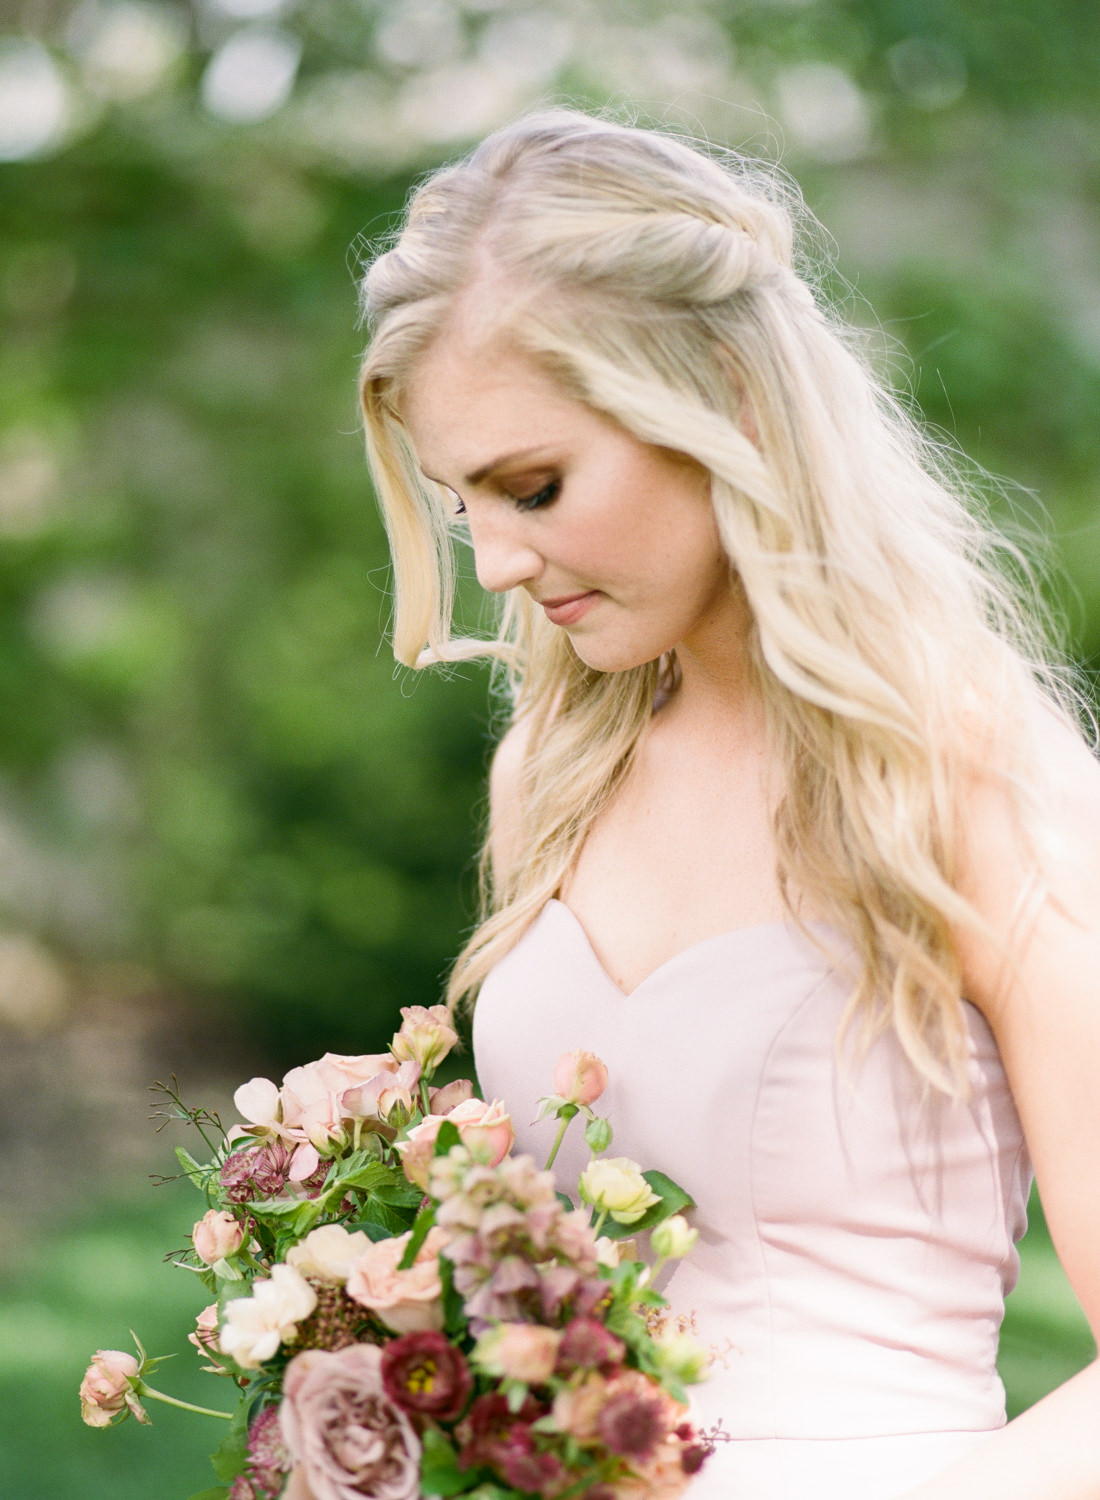 Pink bridesmaid gown and mauve flowers, St,. Louis Fine Film Wedding Photographer Erica Robnett Photography